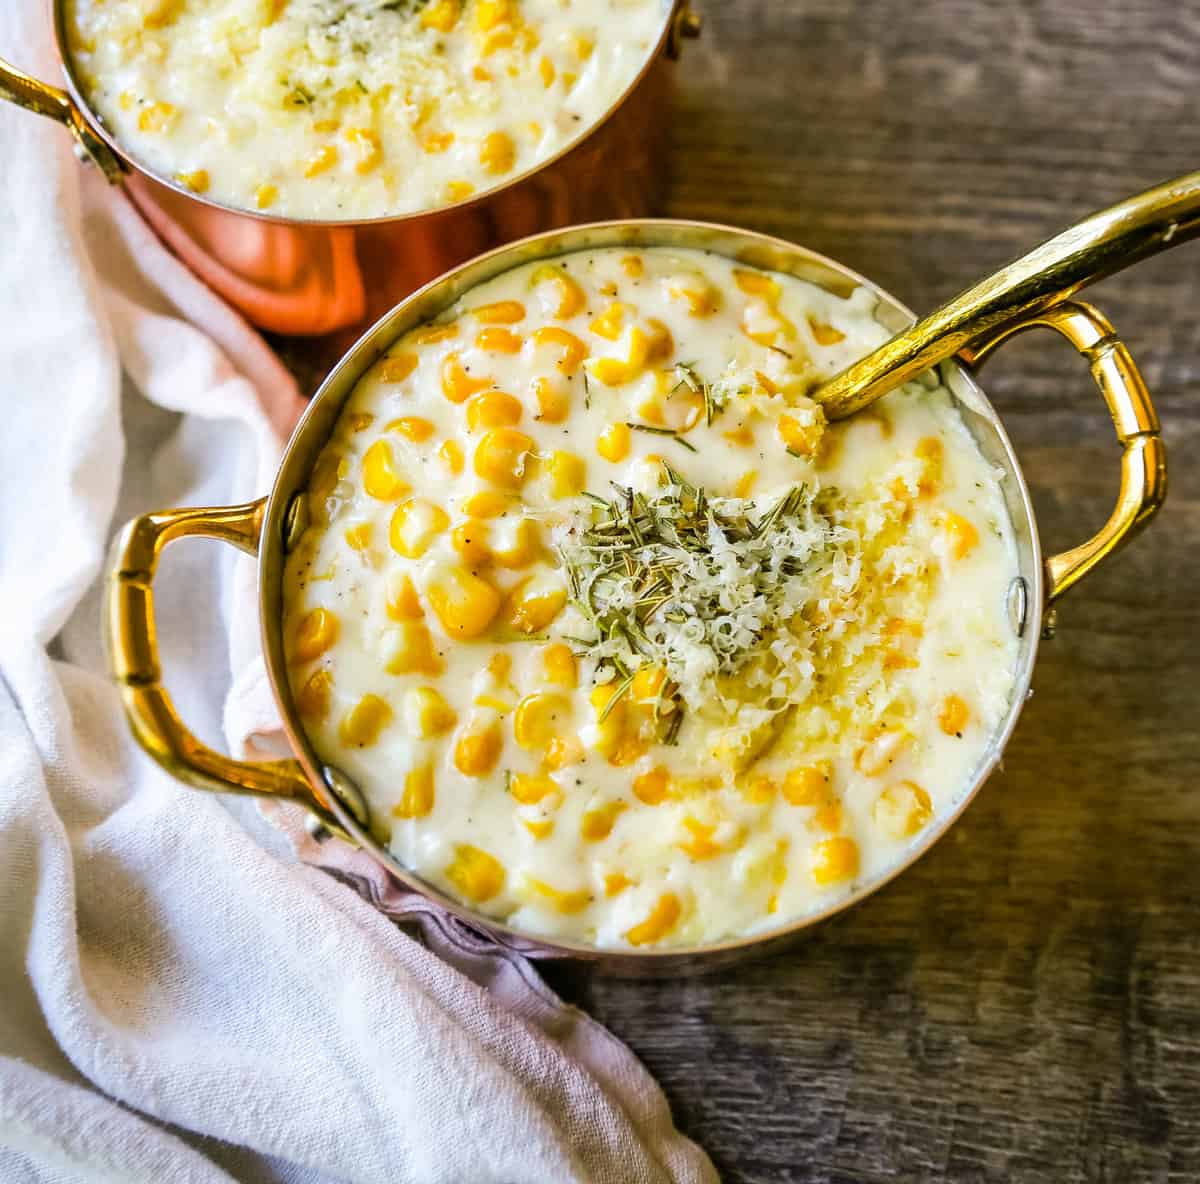 Creamed Corn is made with corn, fresh cream, butter, parmesan cheese, and salt. This is the best creamed corn recipe! We serve this every Thanksgiving and it is the most popular side dish at the table.